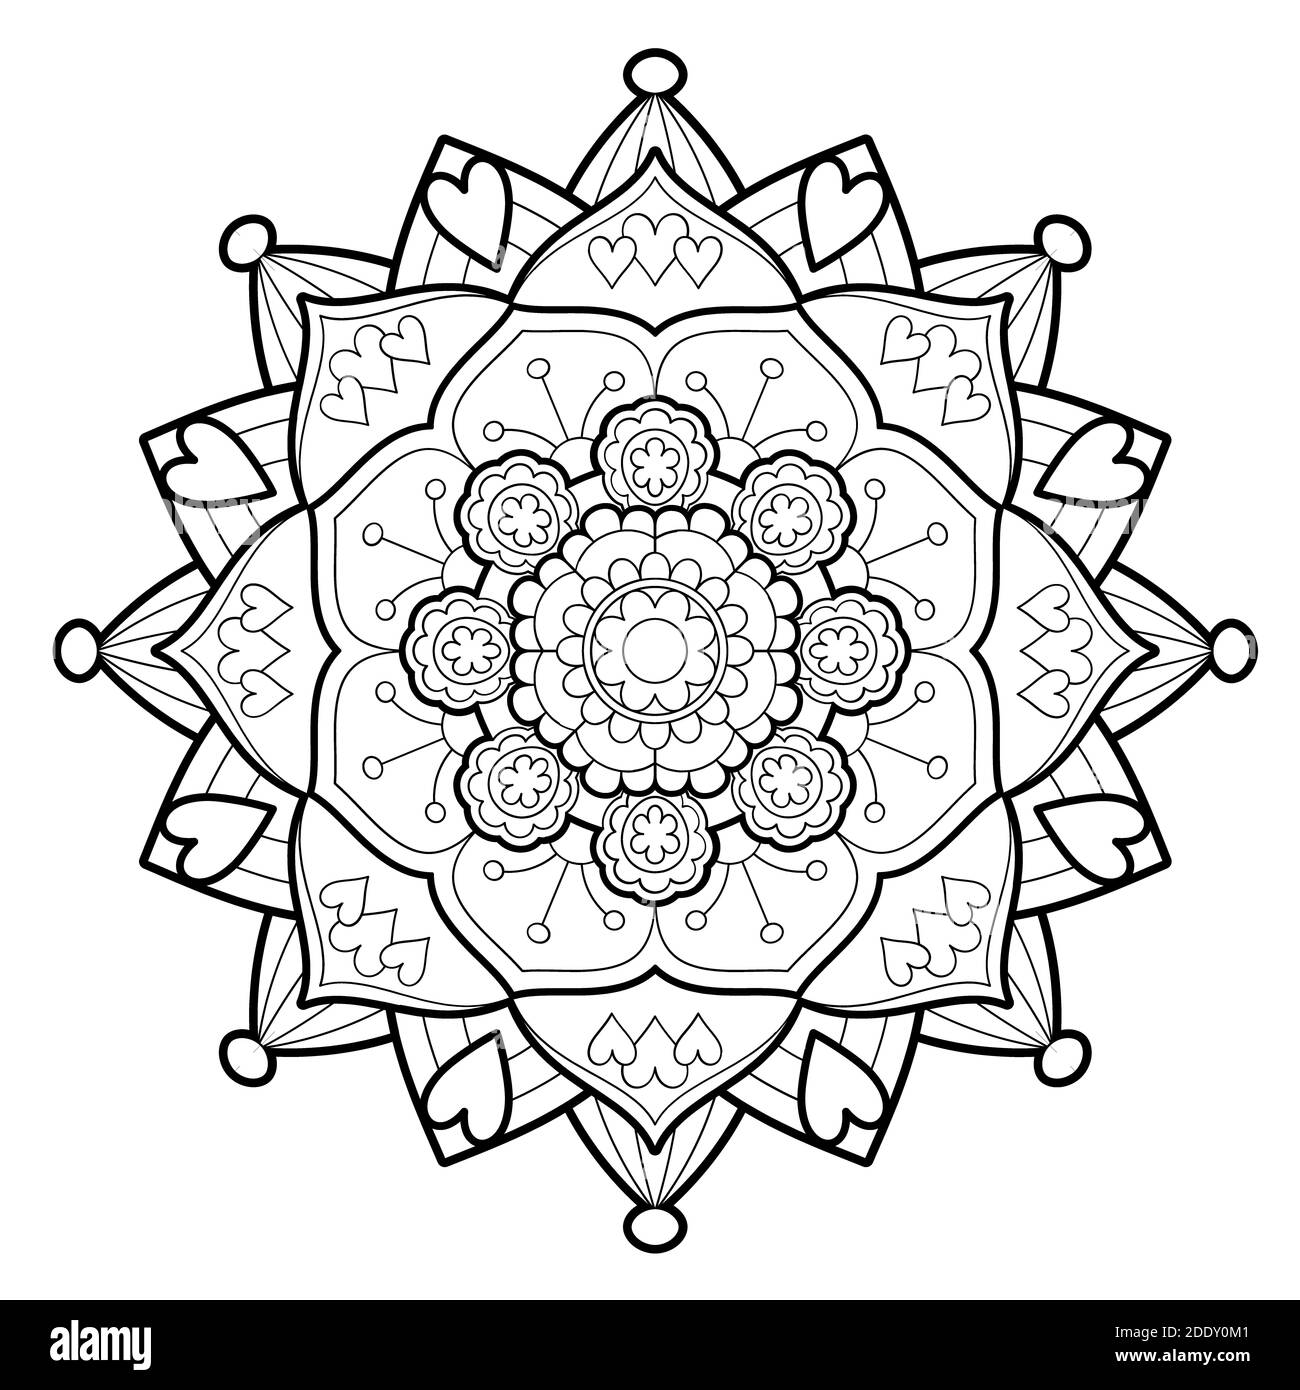 Zentangle Mandala for coloring Page Stock Photo